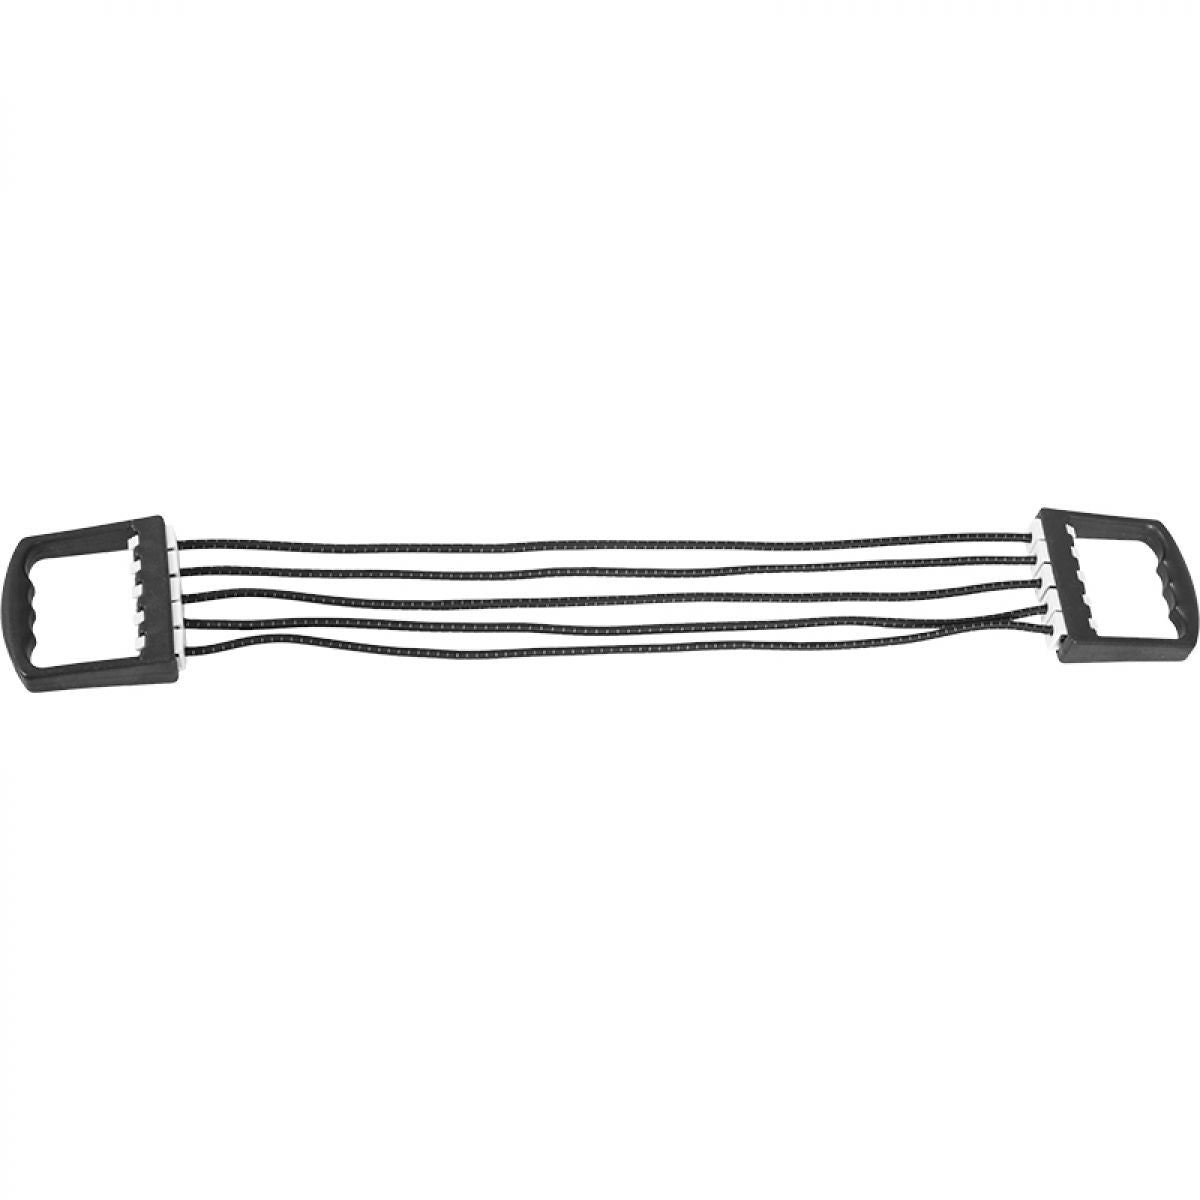 Chest Expander Elastic Band